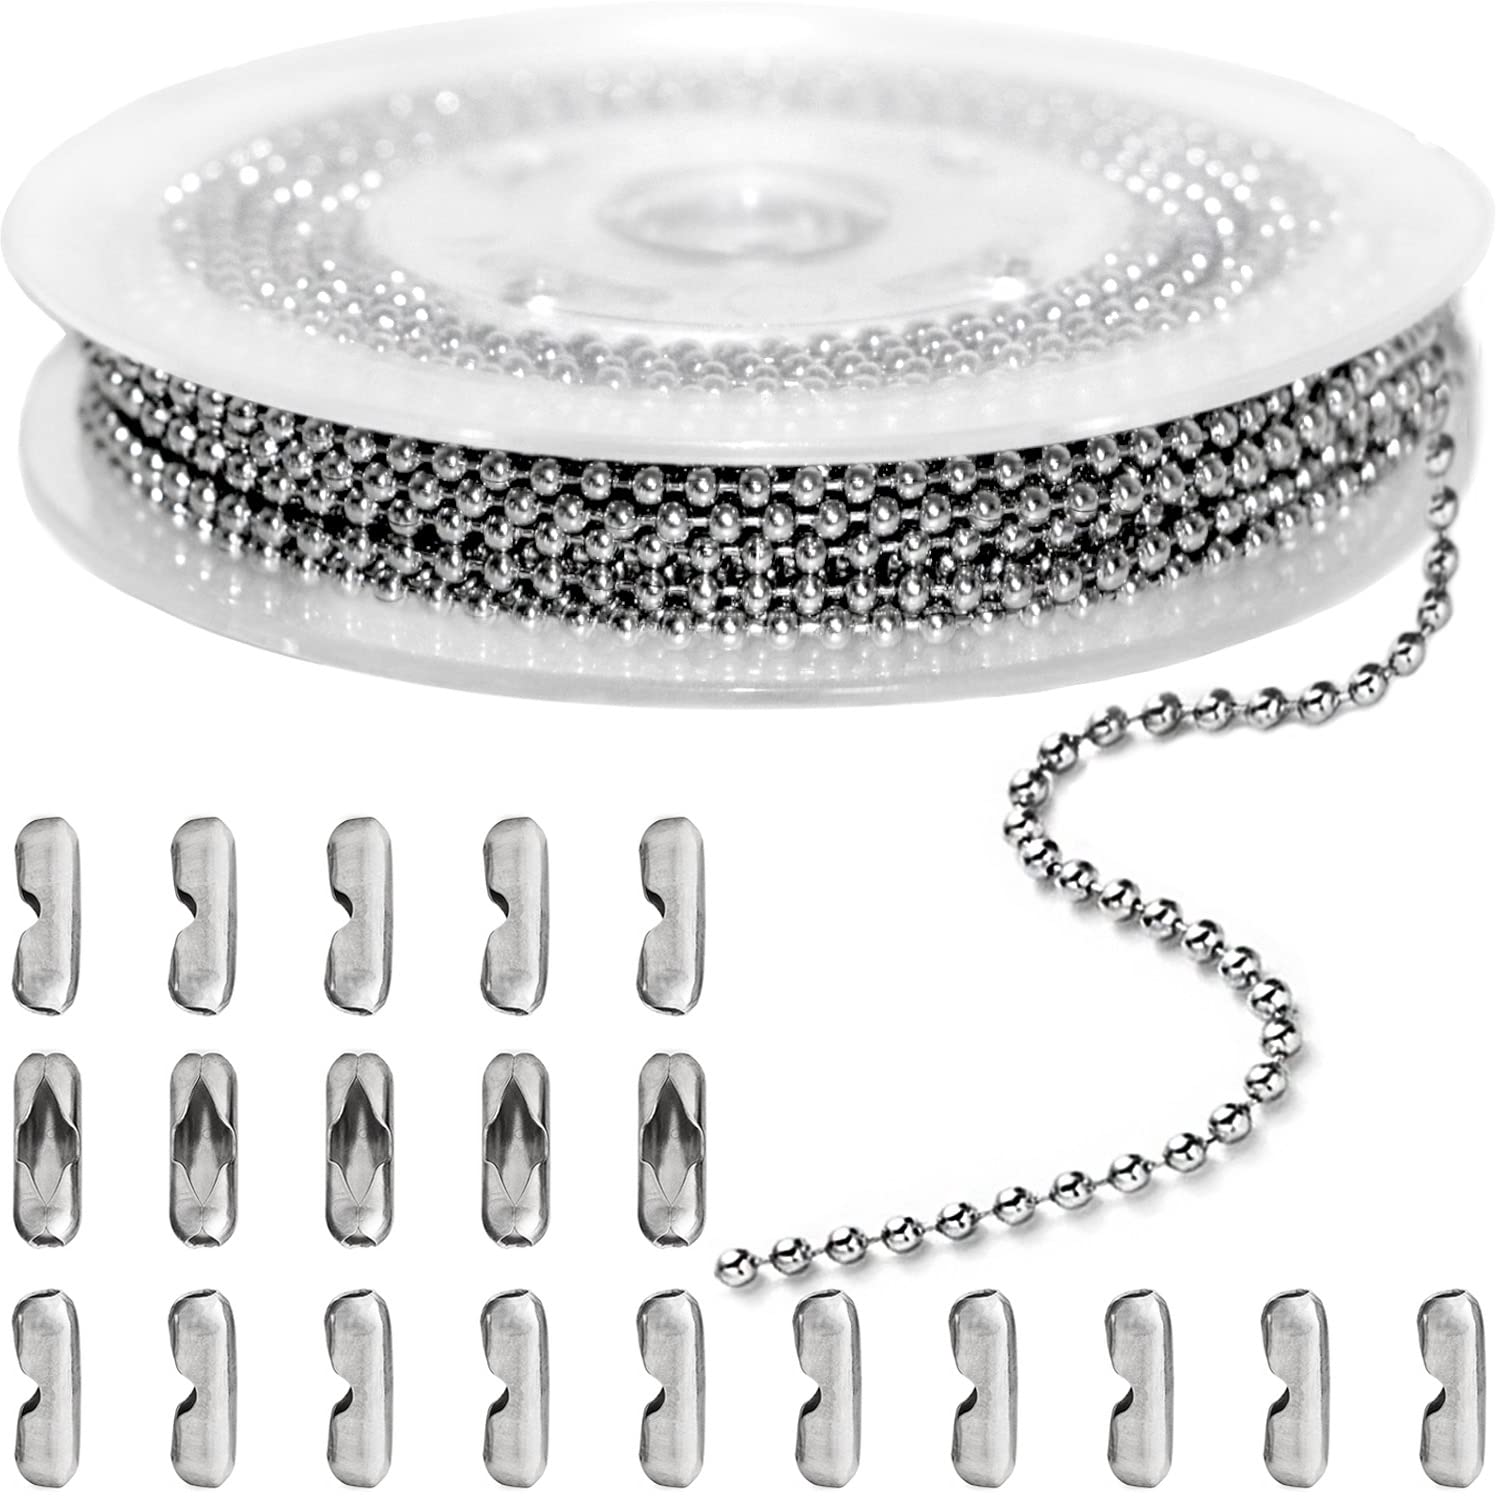 Jishi 33ft Ball Chain 2.4mm Silver Stainless Steel Bead Link Chain Roll for  Beaded Dog Tag Necklace, Mens Military Jewelry Making Supplies, Pull Chain  DIY Bracelets Keychain Craft - w/20#3 Connectors Ball